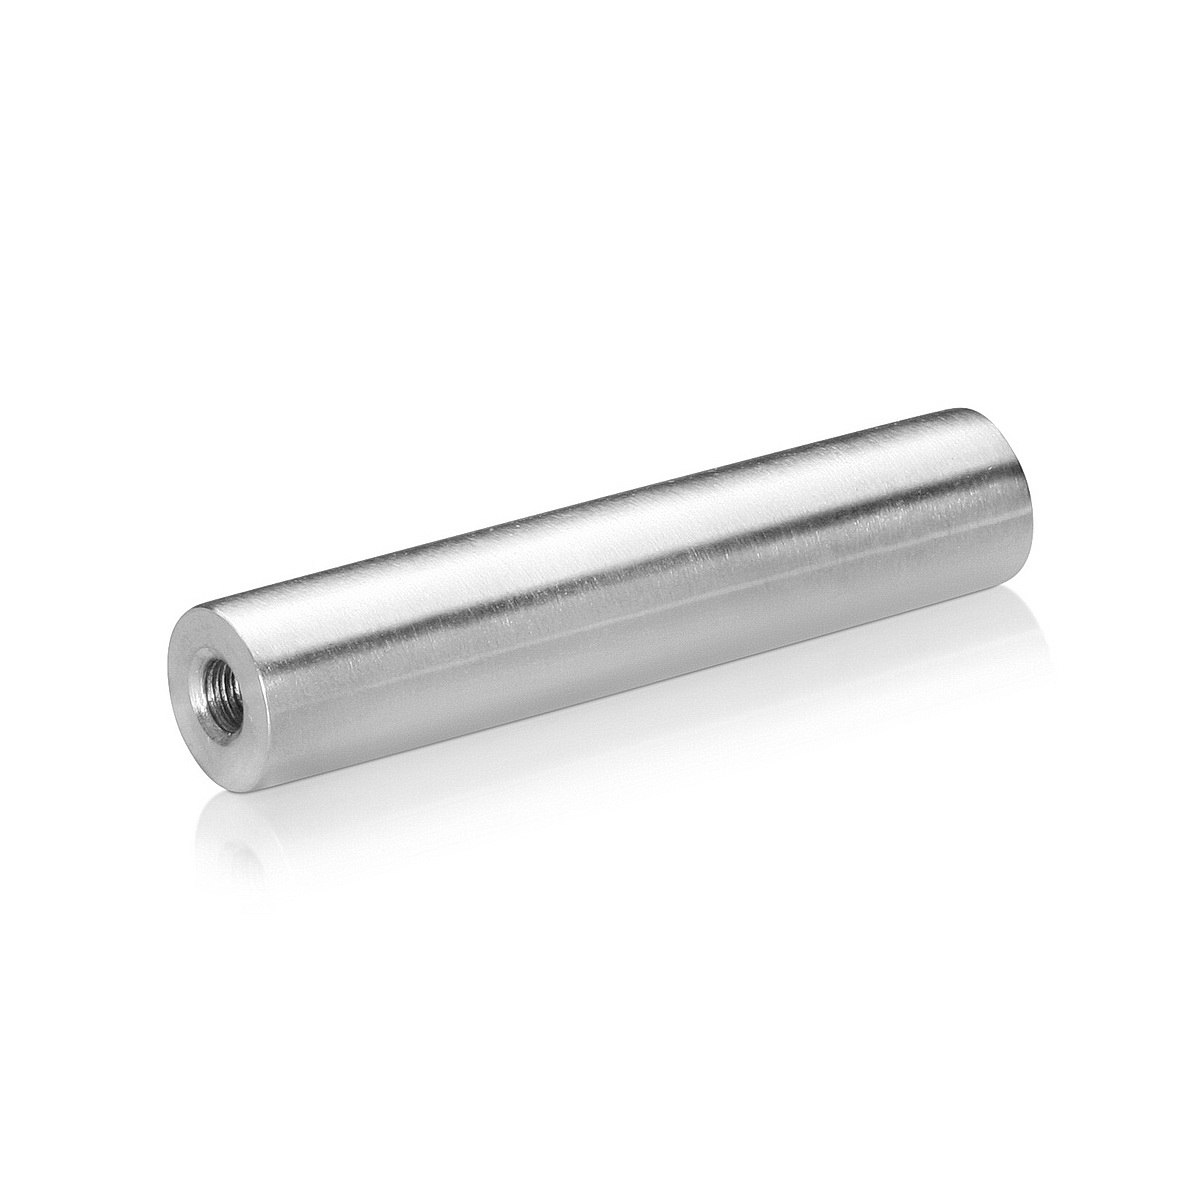 1/4-20 Threaded Barrels Diameter: 5/8'', Length: 3'', Stainless Steel Grade 304 [Required Material Hole Size: 17/64'' ]